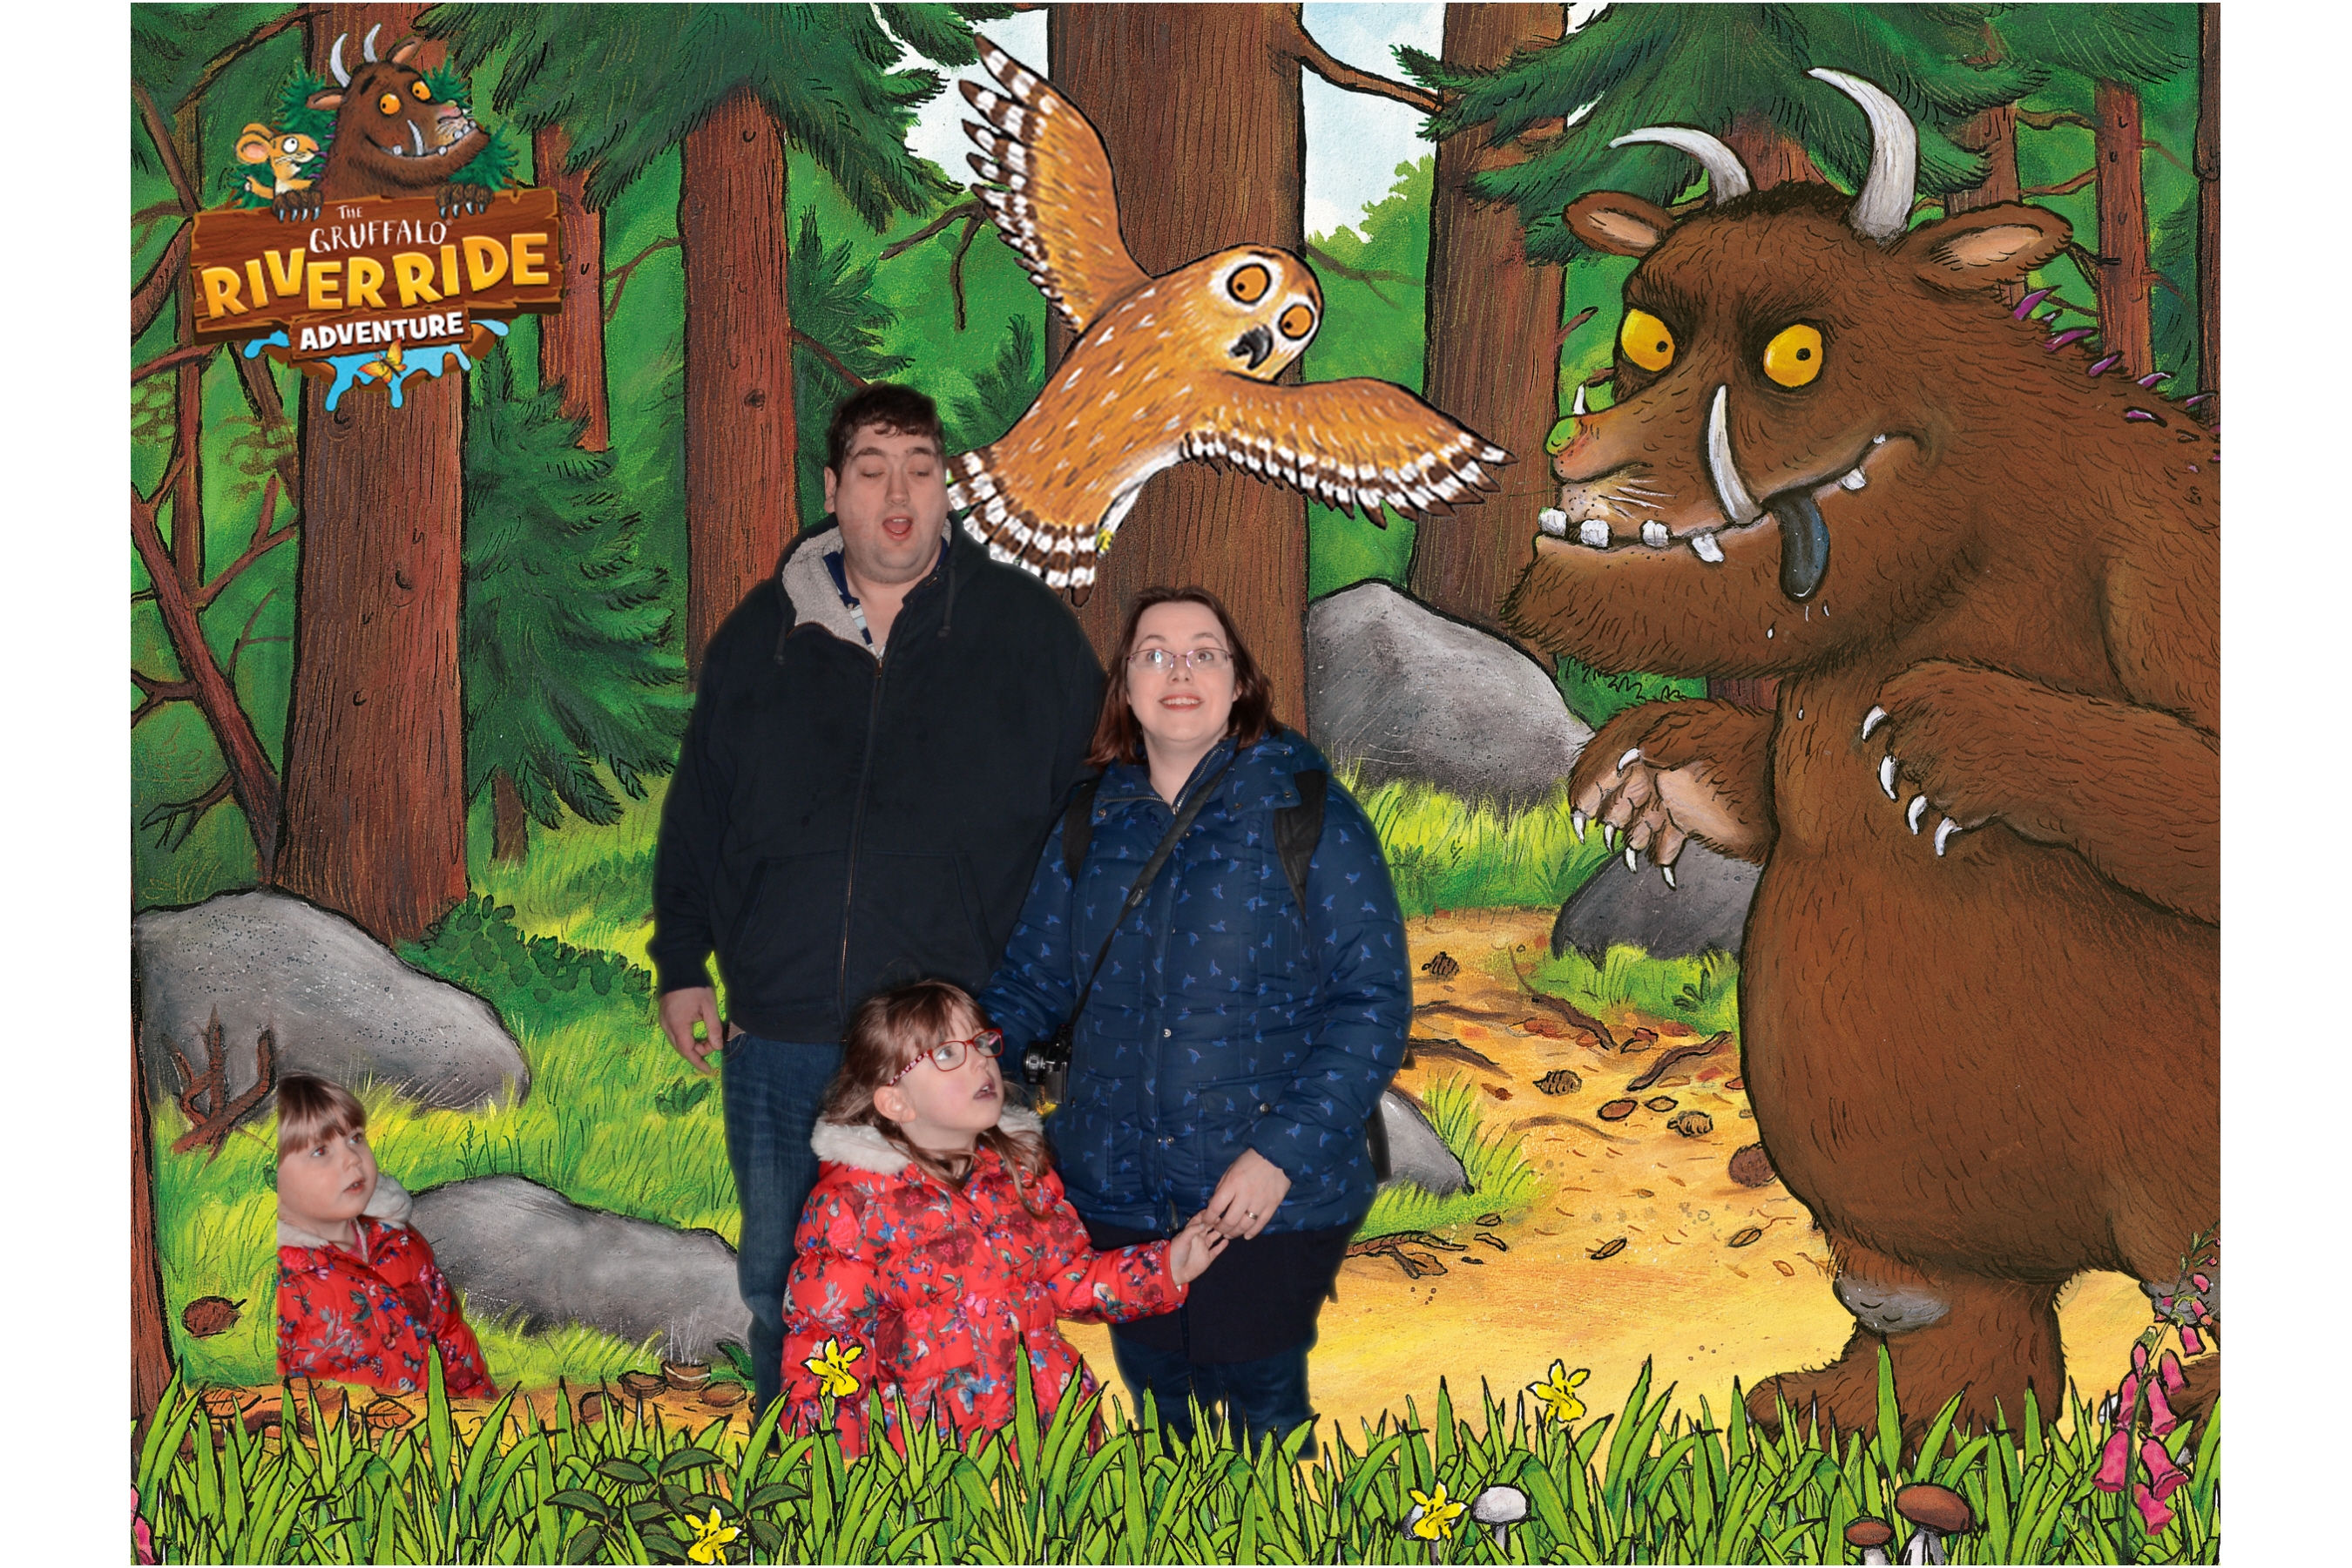 Me, hubby, Jessica and Sophie with the characters from the Gruffalo in our green screen photo